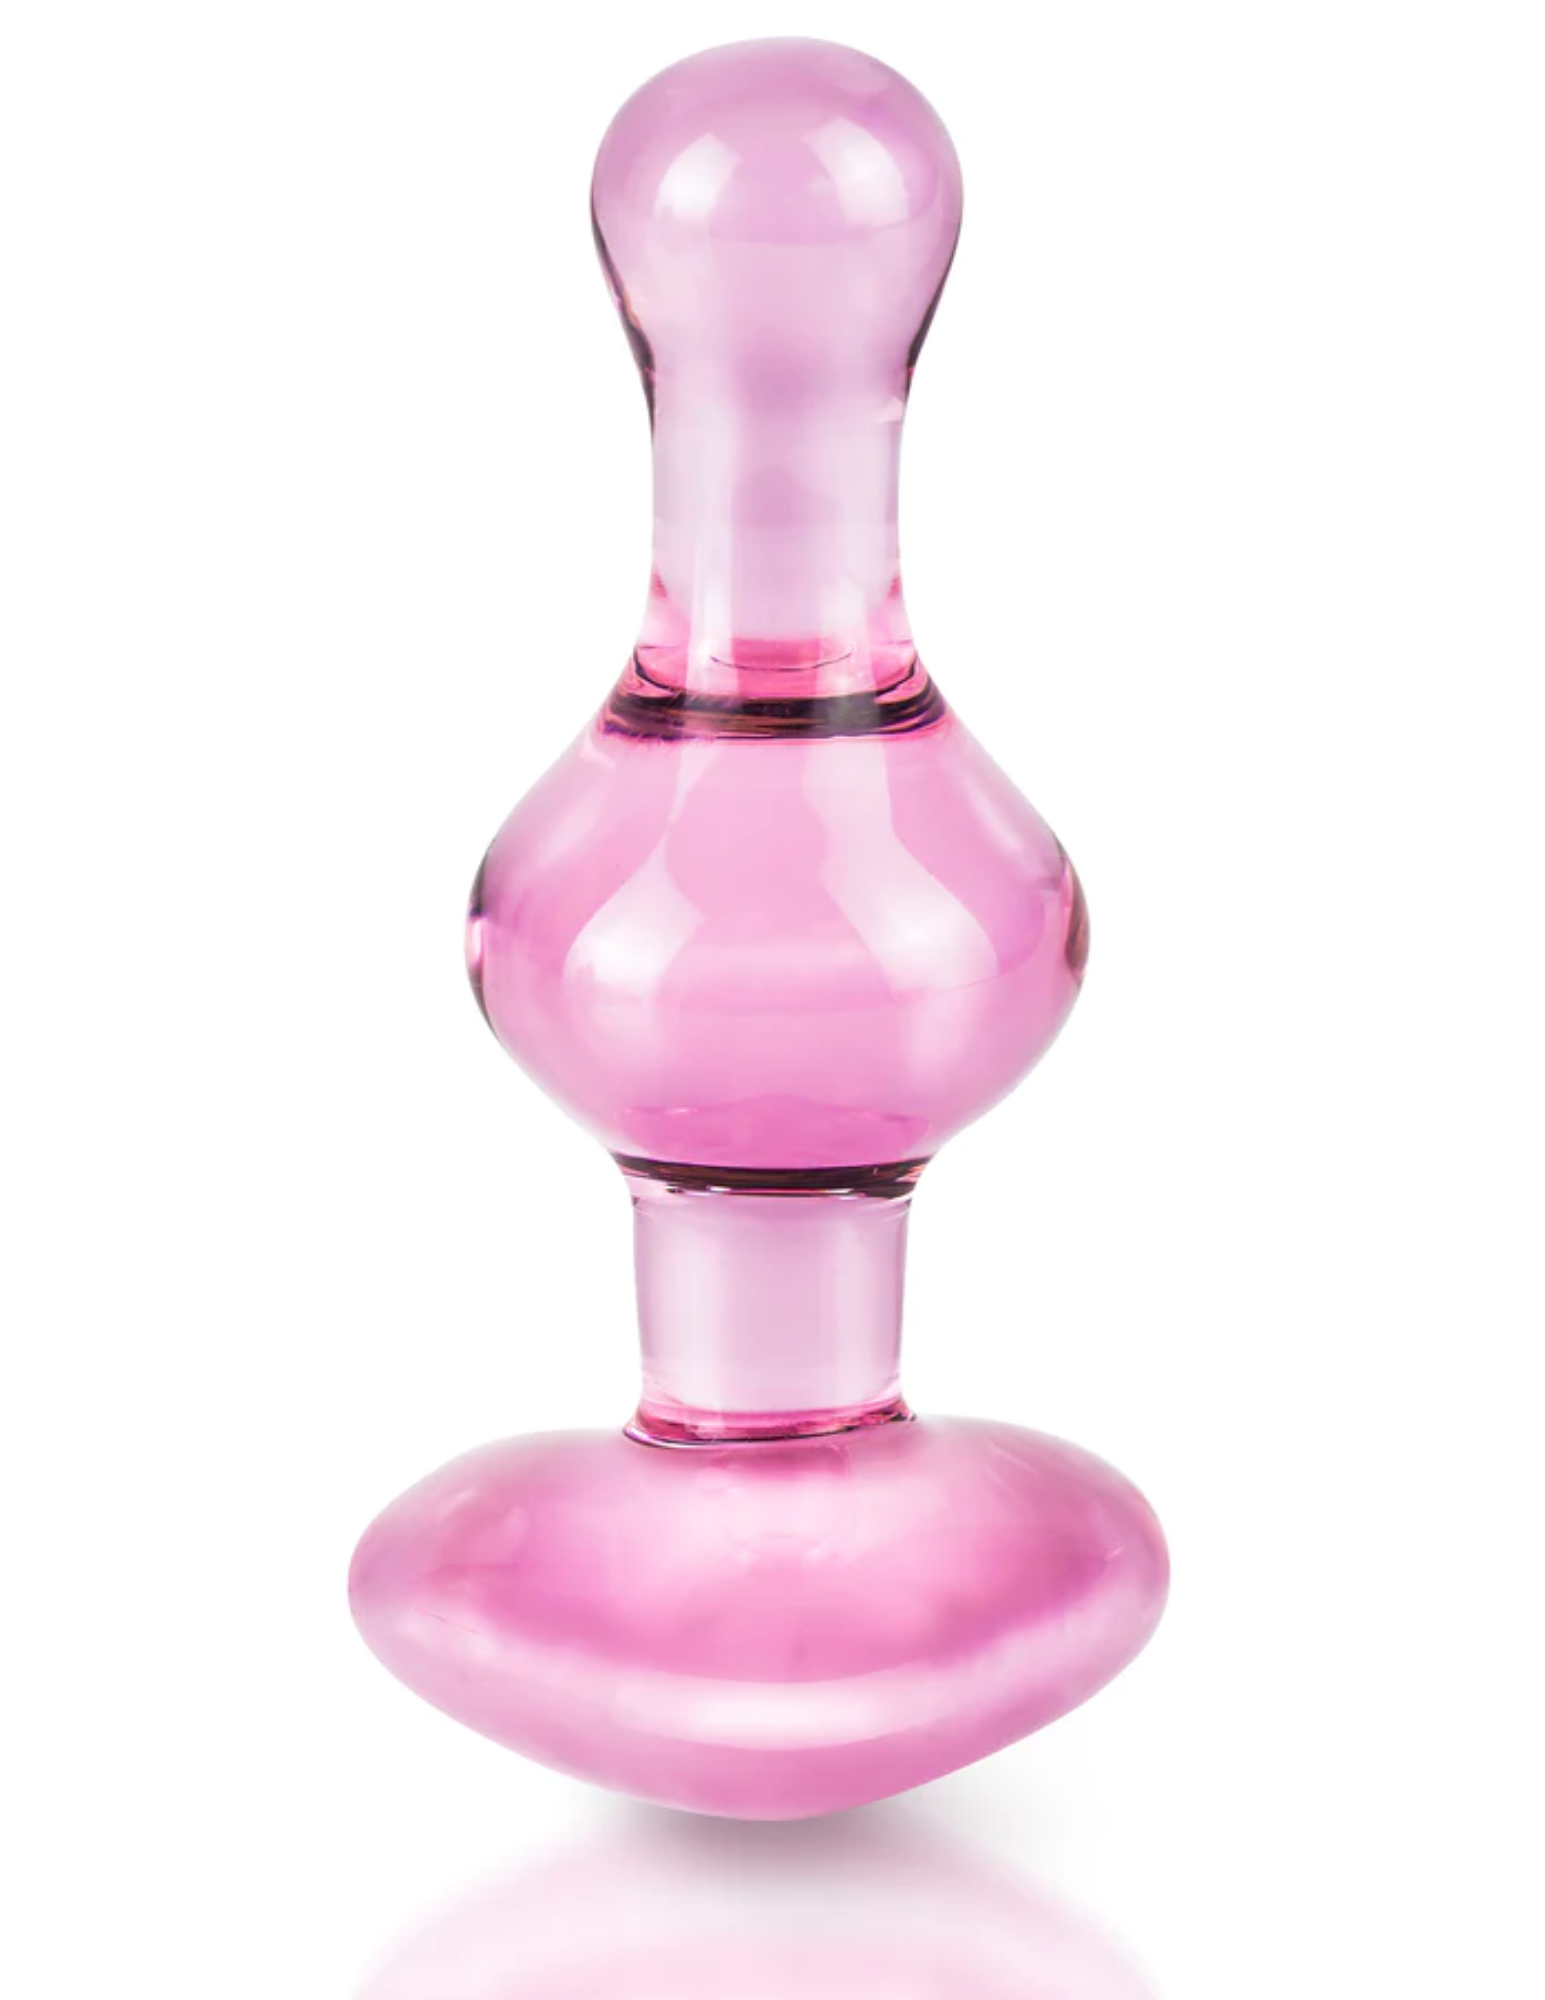 Up-right photo of the Icicles No. 75 Beaded Heart Shaped Glass Anal Plug from Pipedreams (pink) shows off its uniquely bubbled mid-point.